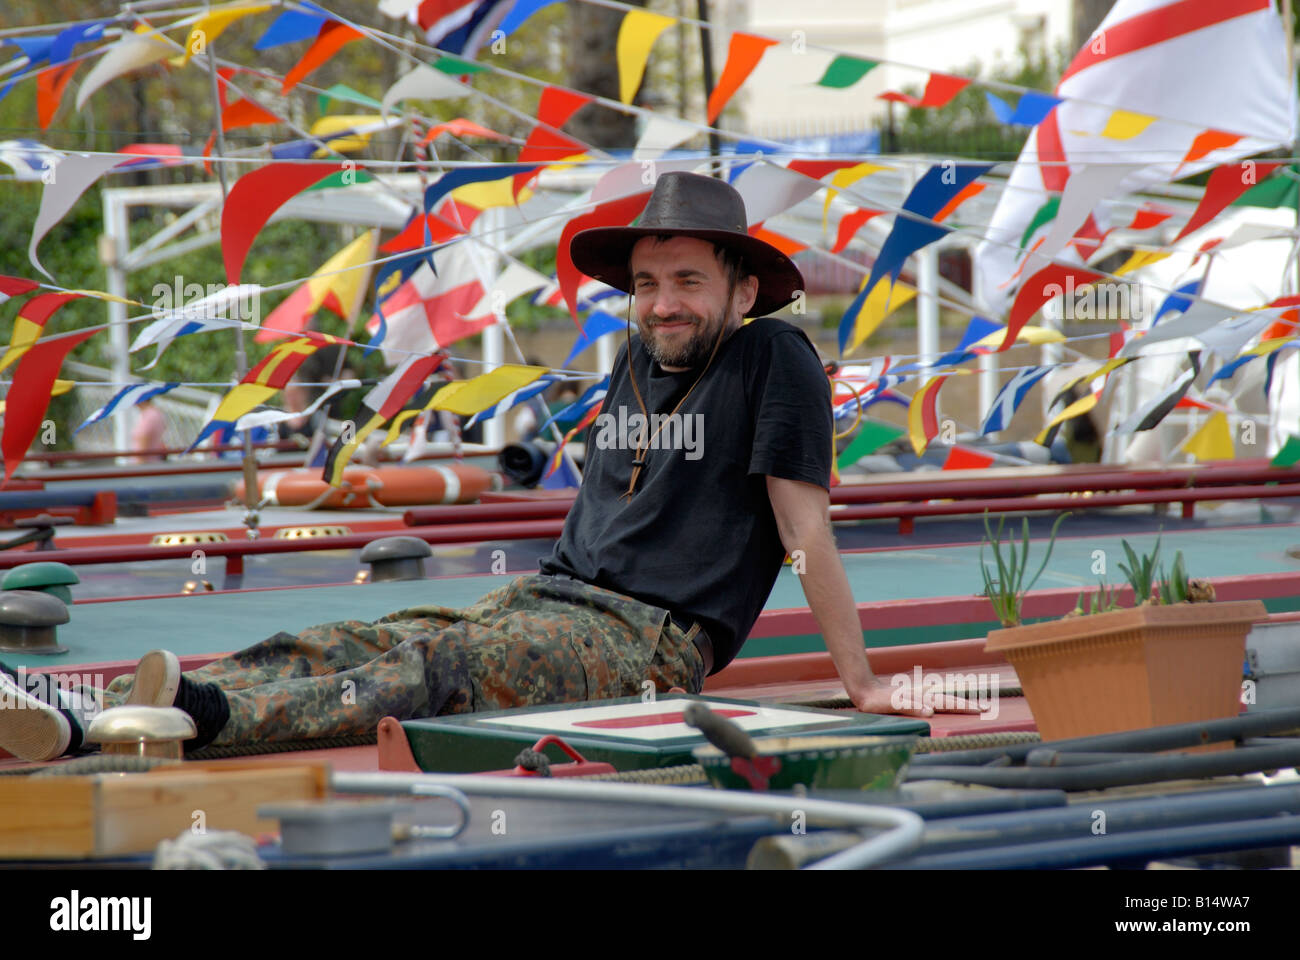 Man in cowboy hat relaxing on his narrowboat surrounded by flags and pennants at the Canalway Cavalcade, Little Venice, London Stock Photo